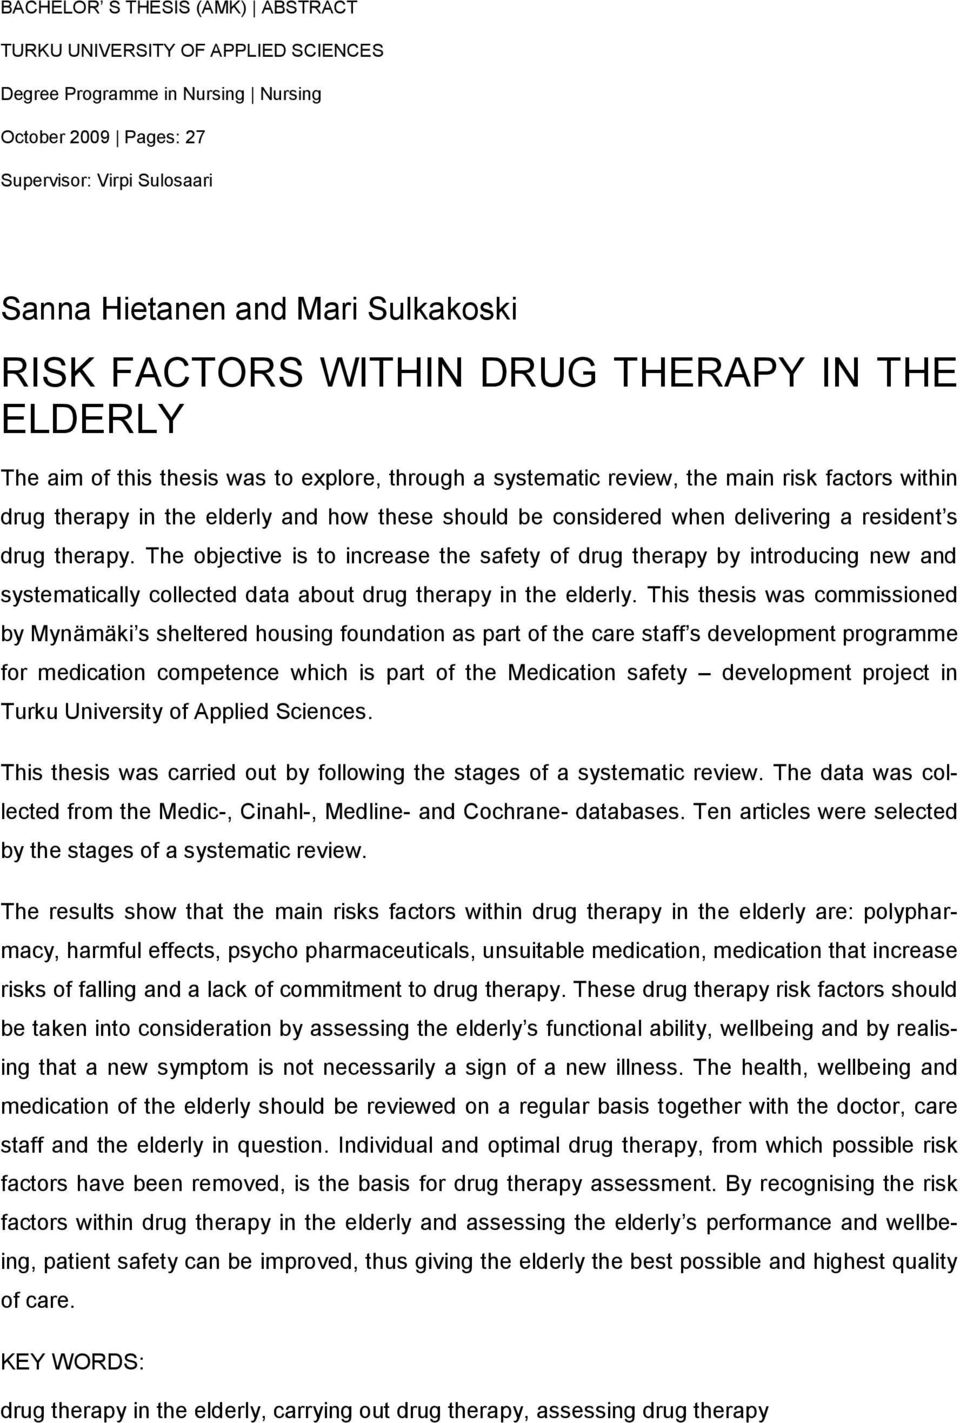 considered when delivering a resident s drug therapy. The objective is to increase the safety of drug therapy by introducing new and systematically collected data about drug therapy in the elderly.